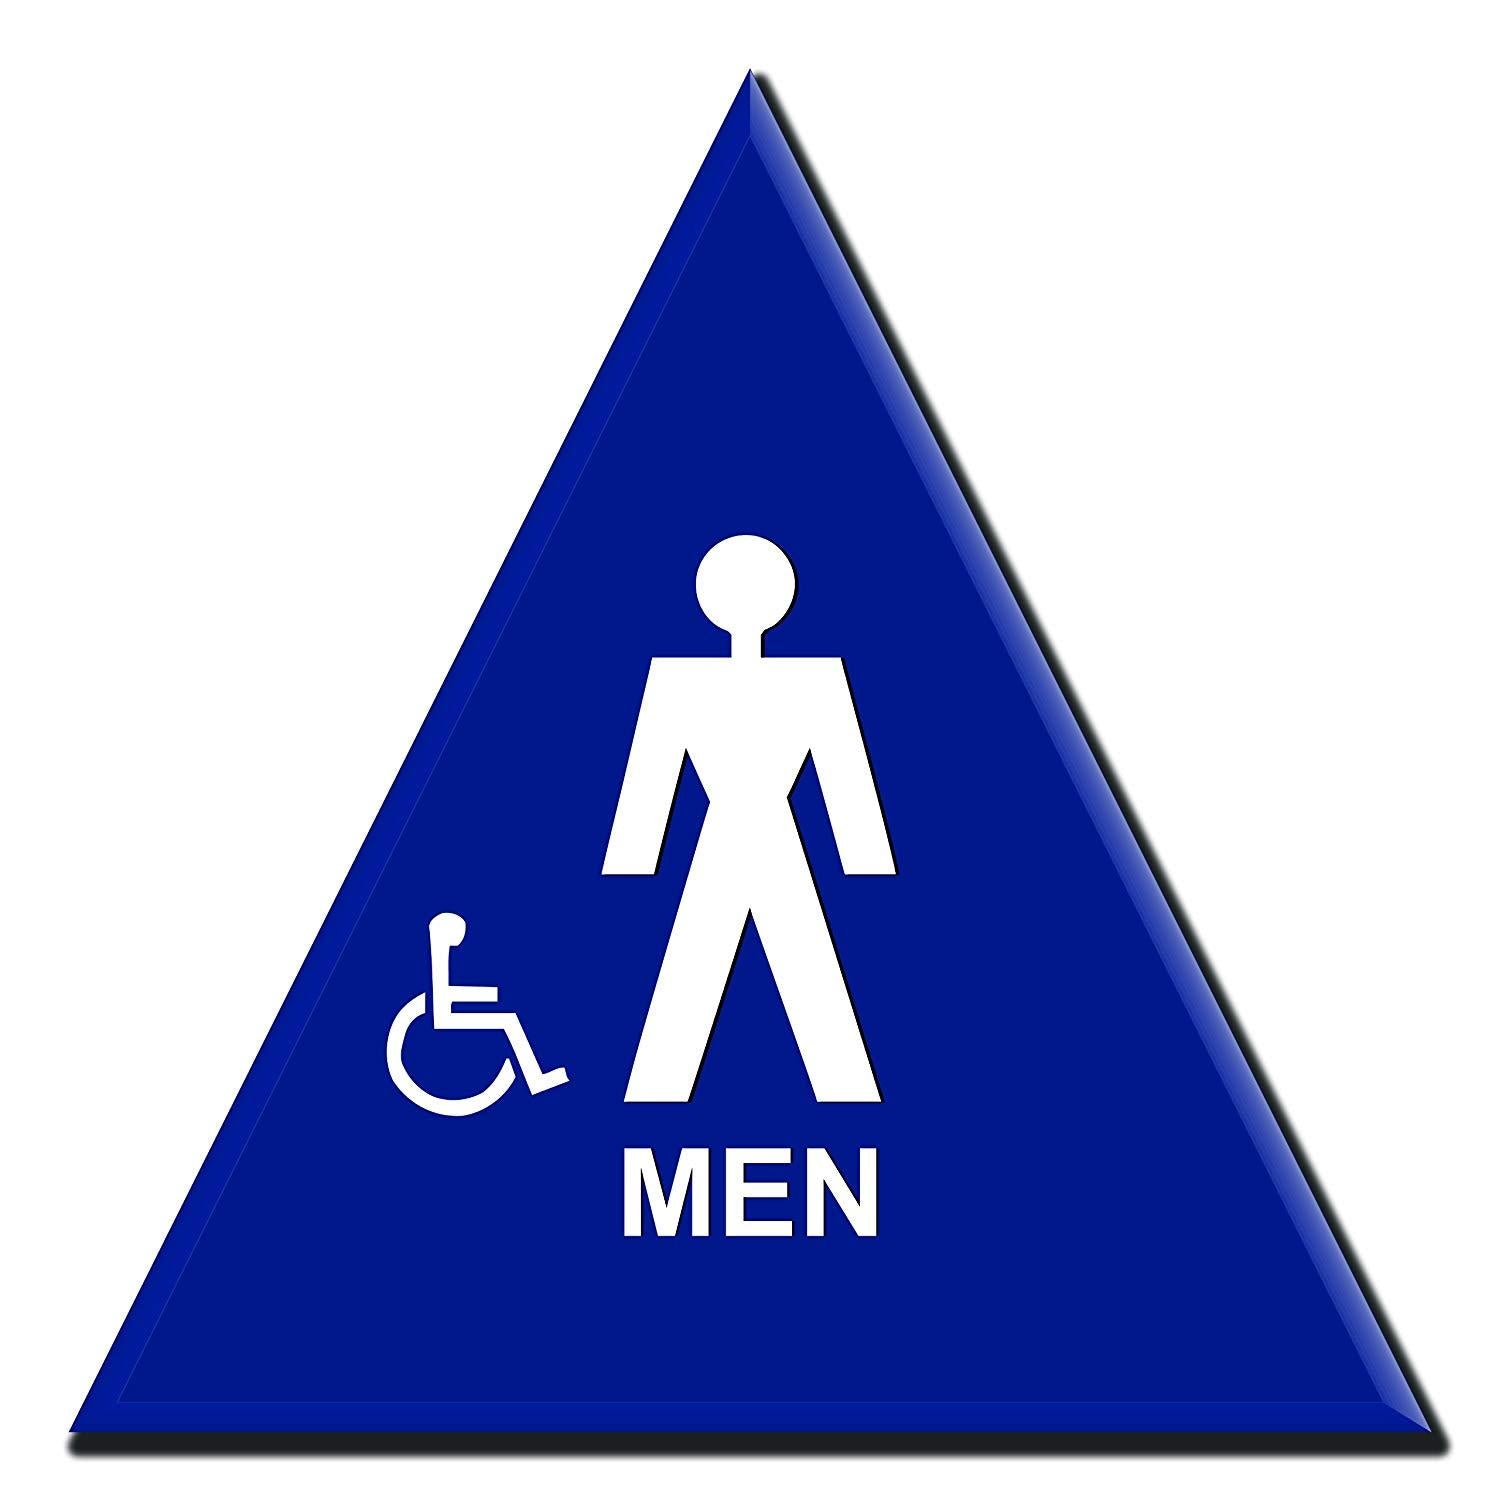 Lynch MR-12, Triange Mens Bathroom Sign With Accessible Symbol, Blue